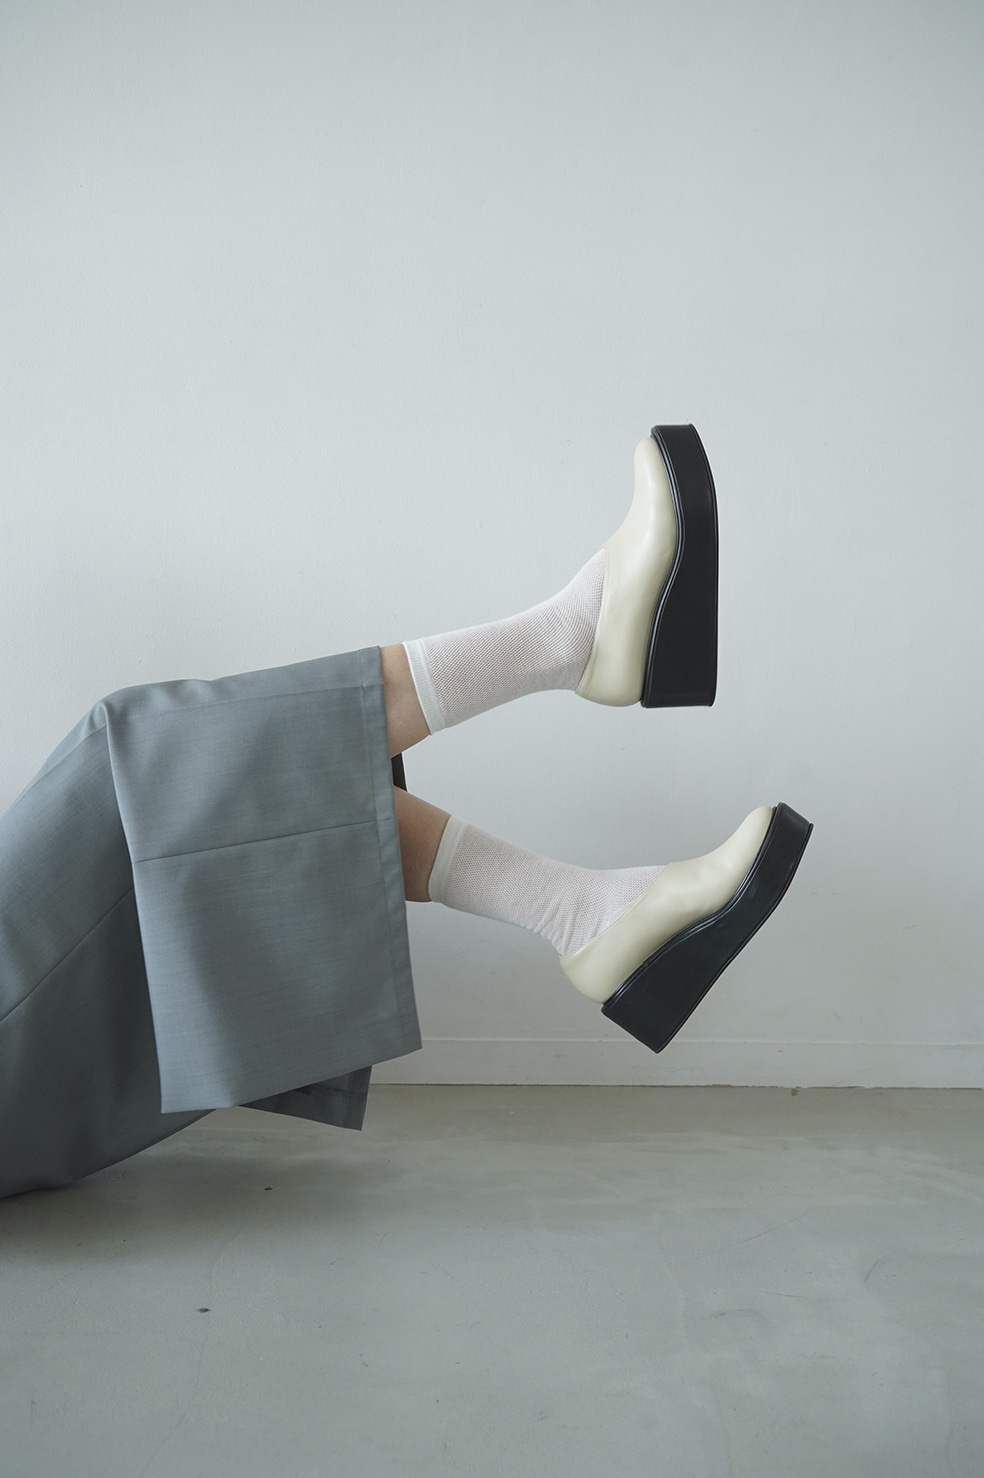 VOLUME SOLE SHOES｜BAG/SHOES(バッグ/シューズ)｜CLANE OFFICIAL ...